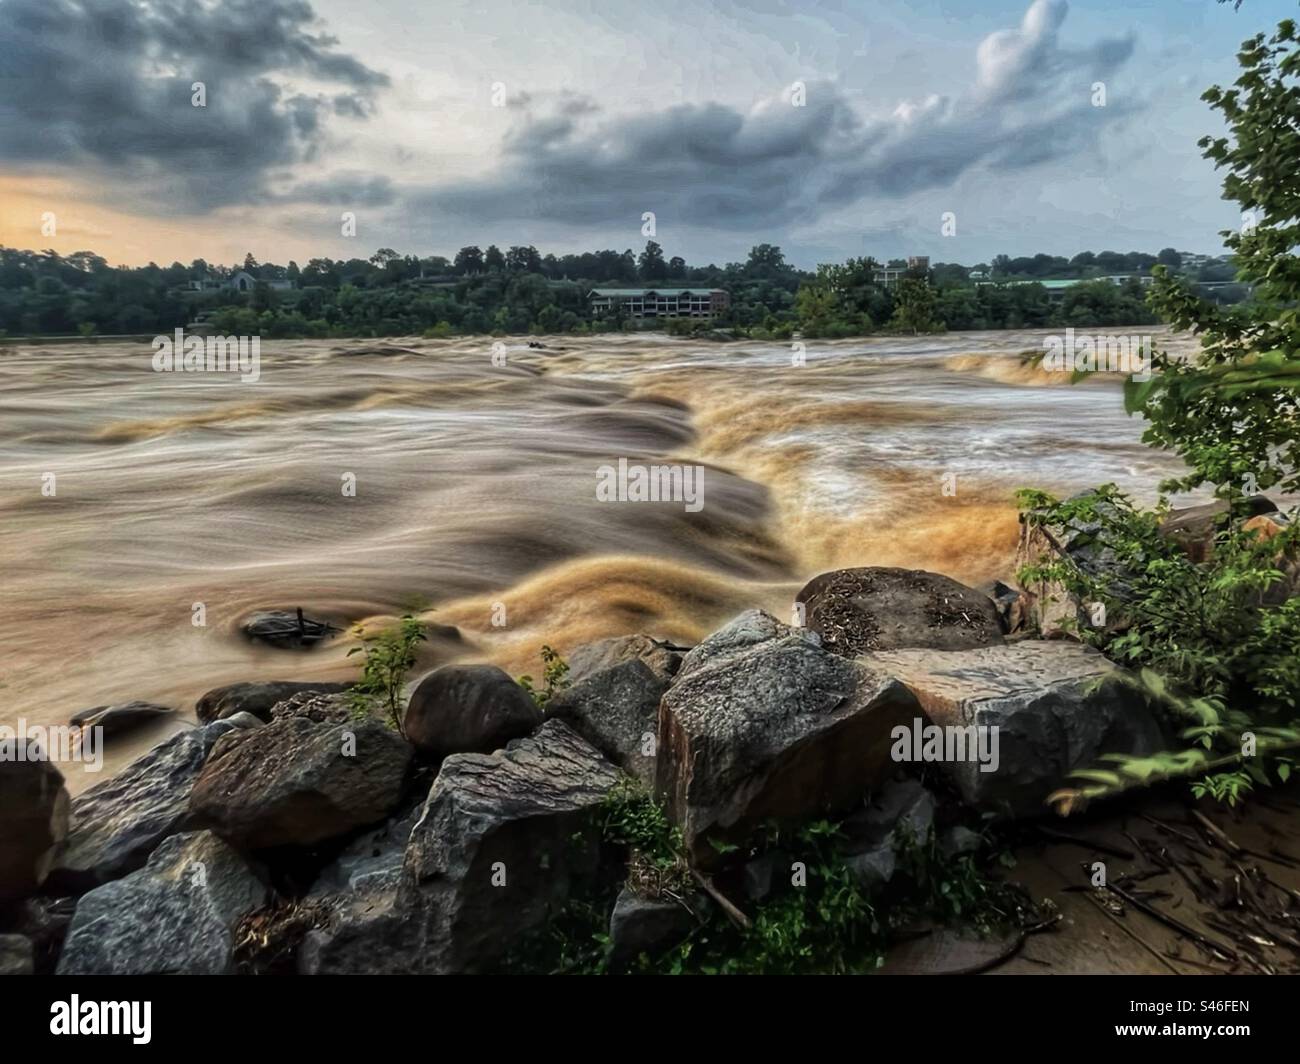 Dark storm clouds hang over a raging t James River in Richmond, VA. Stock Photo